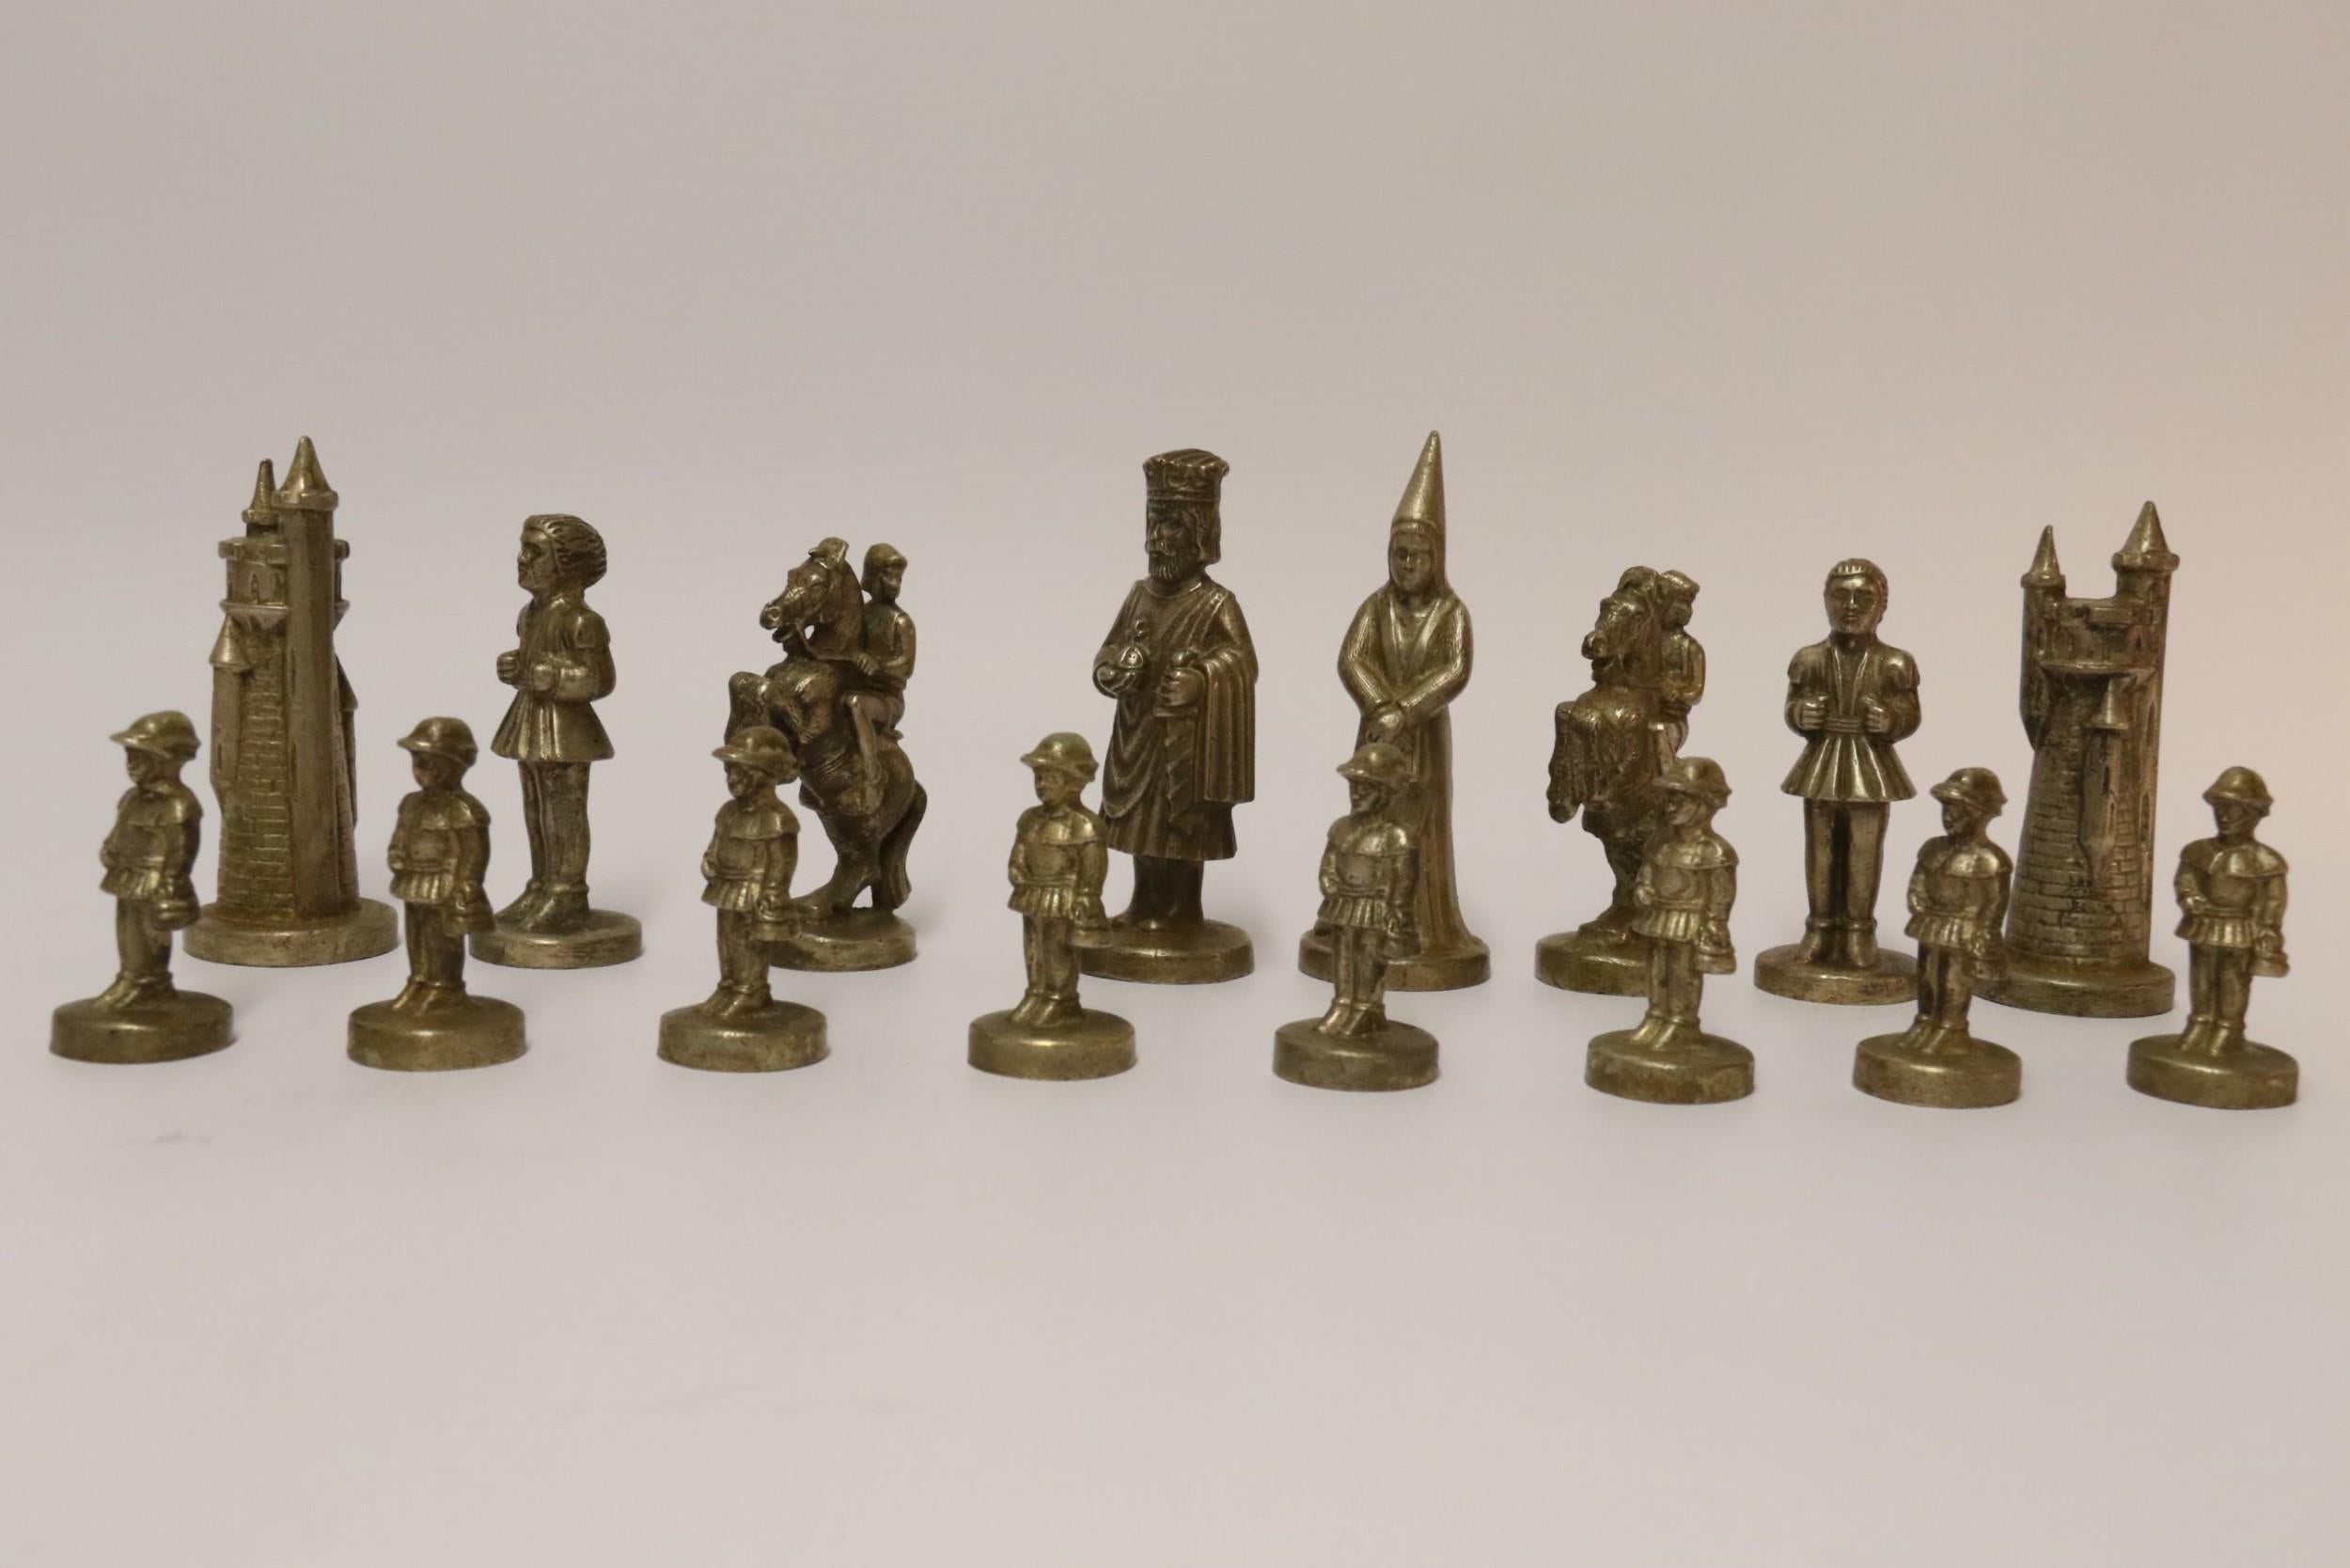 Novelty Heavy Cast Nickel and Bronze Chess Set Modeled on Medieval Figures For Sale 15